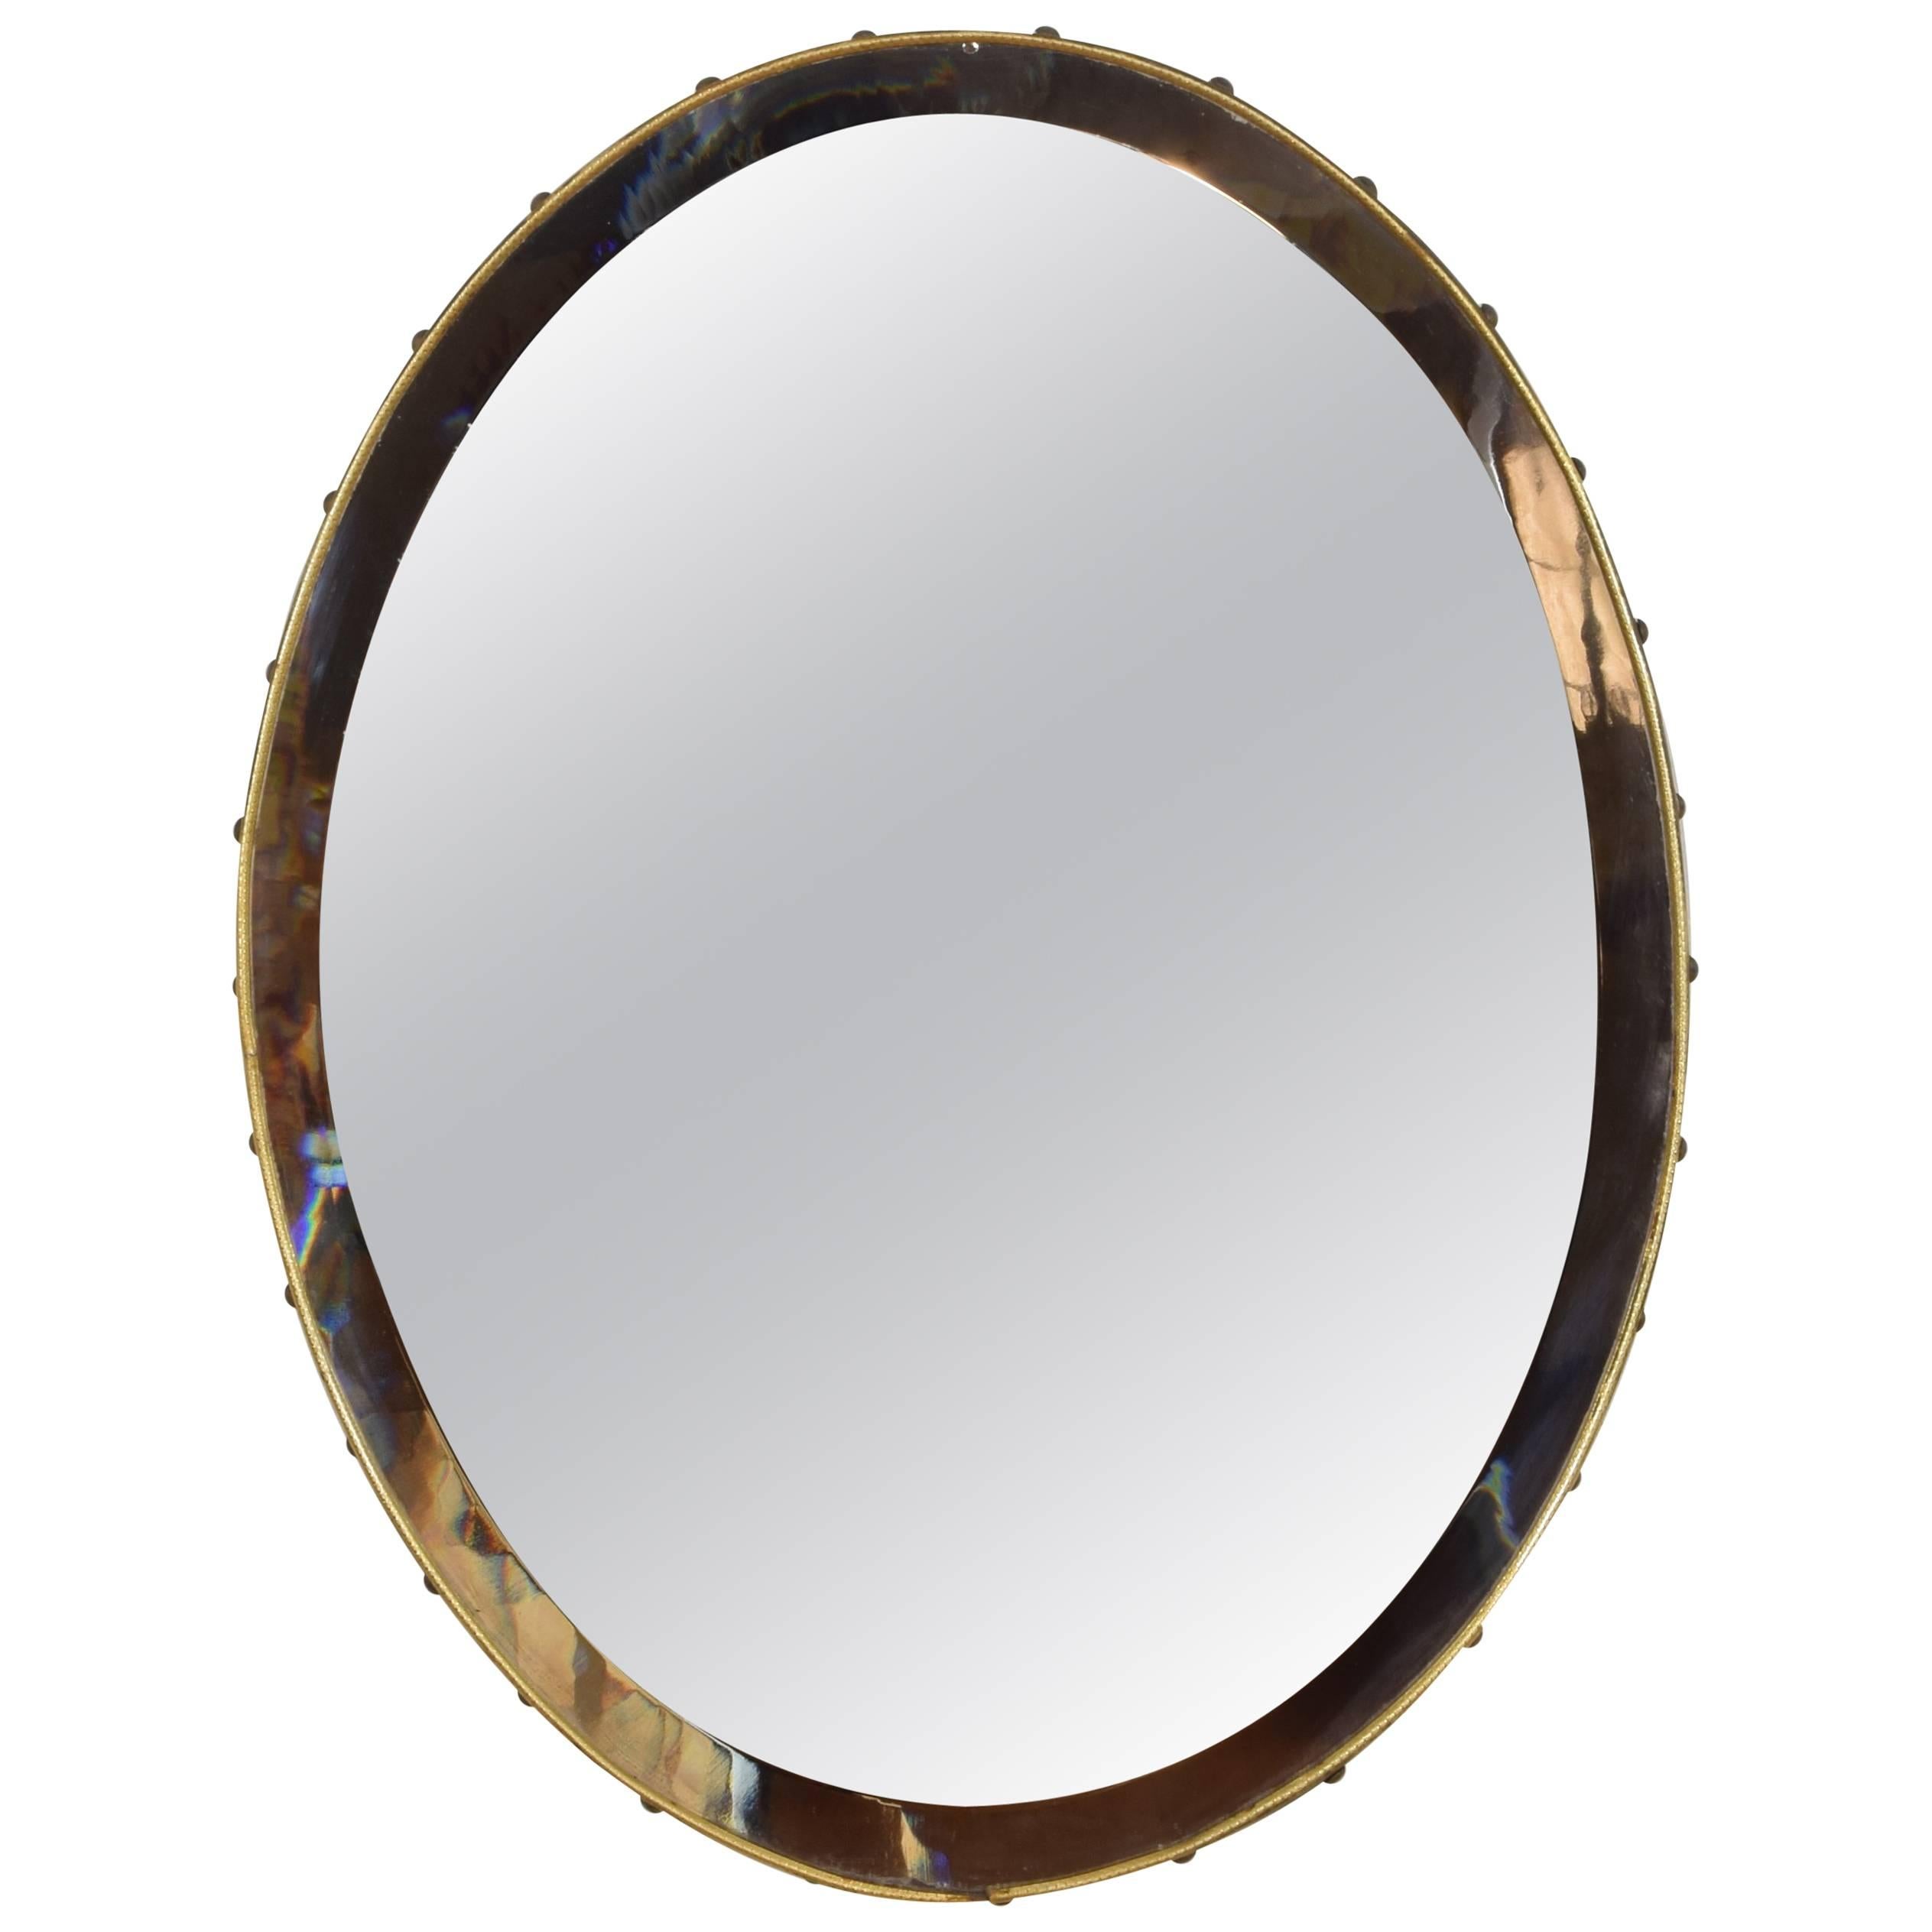 Italian Mid-20th Century Brass Framed Oval Mirror with Bevelled Mirror Plate